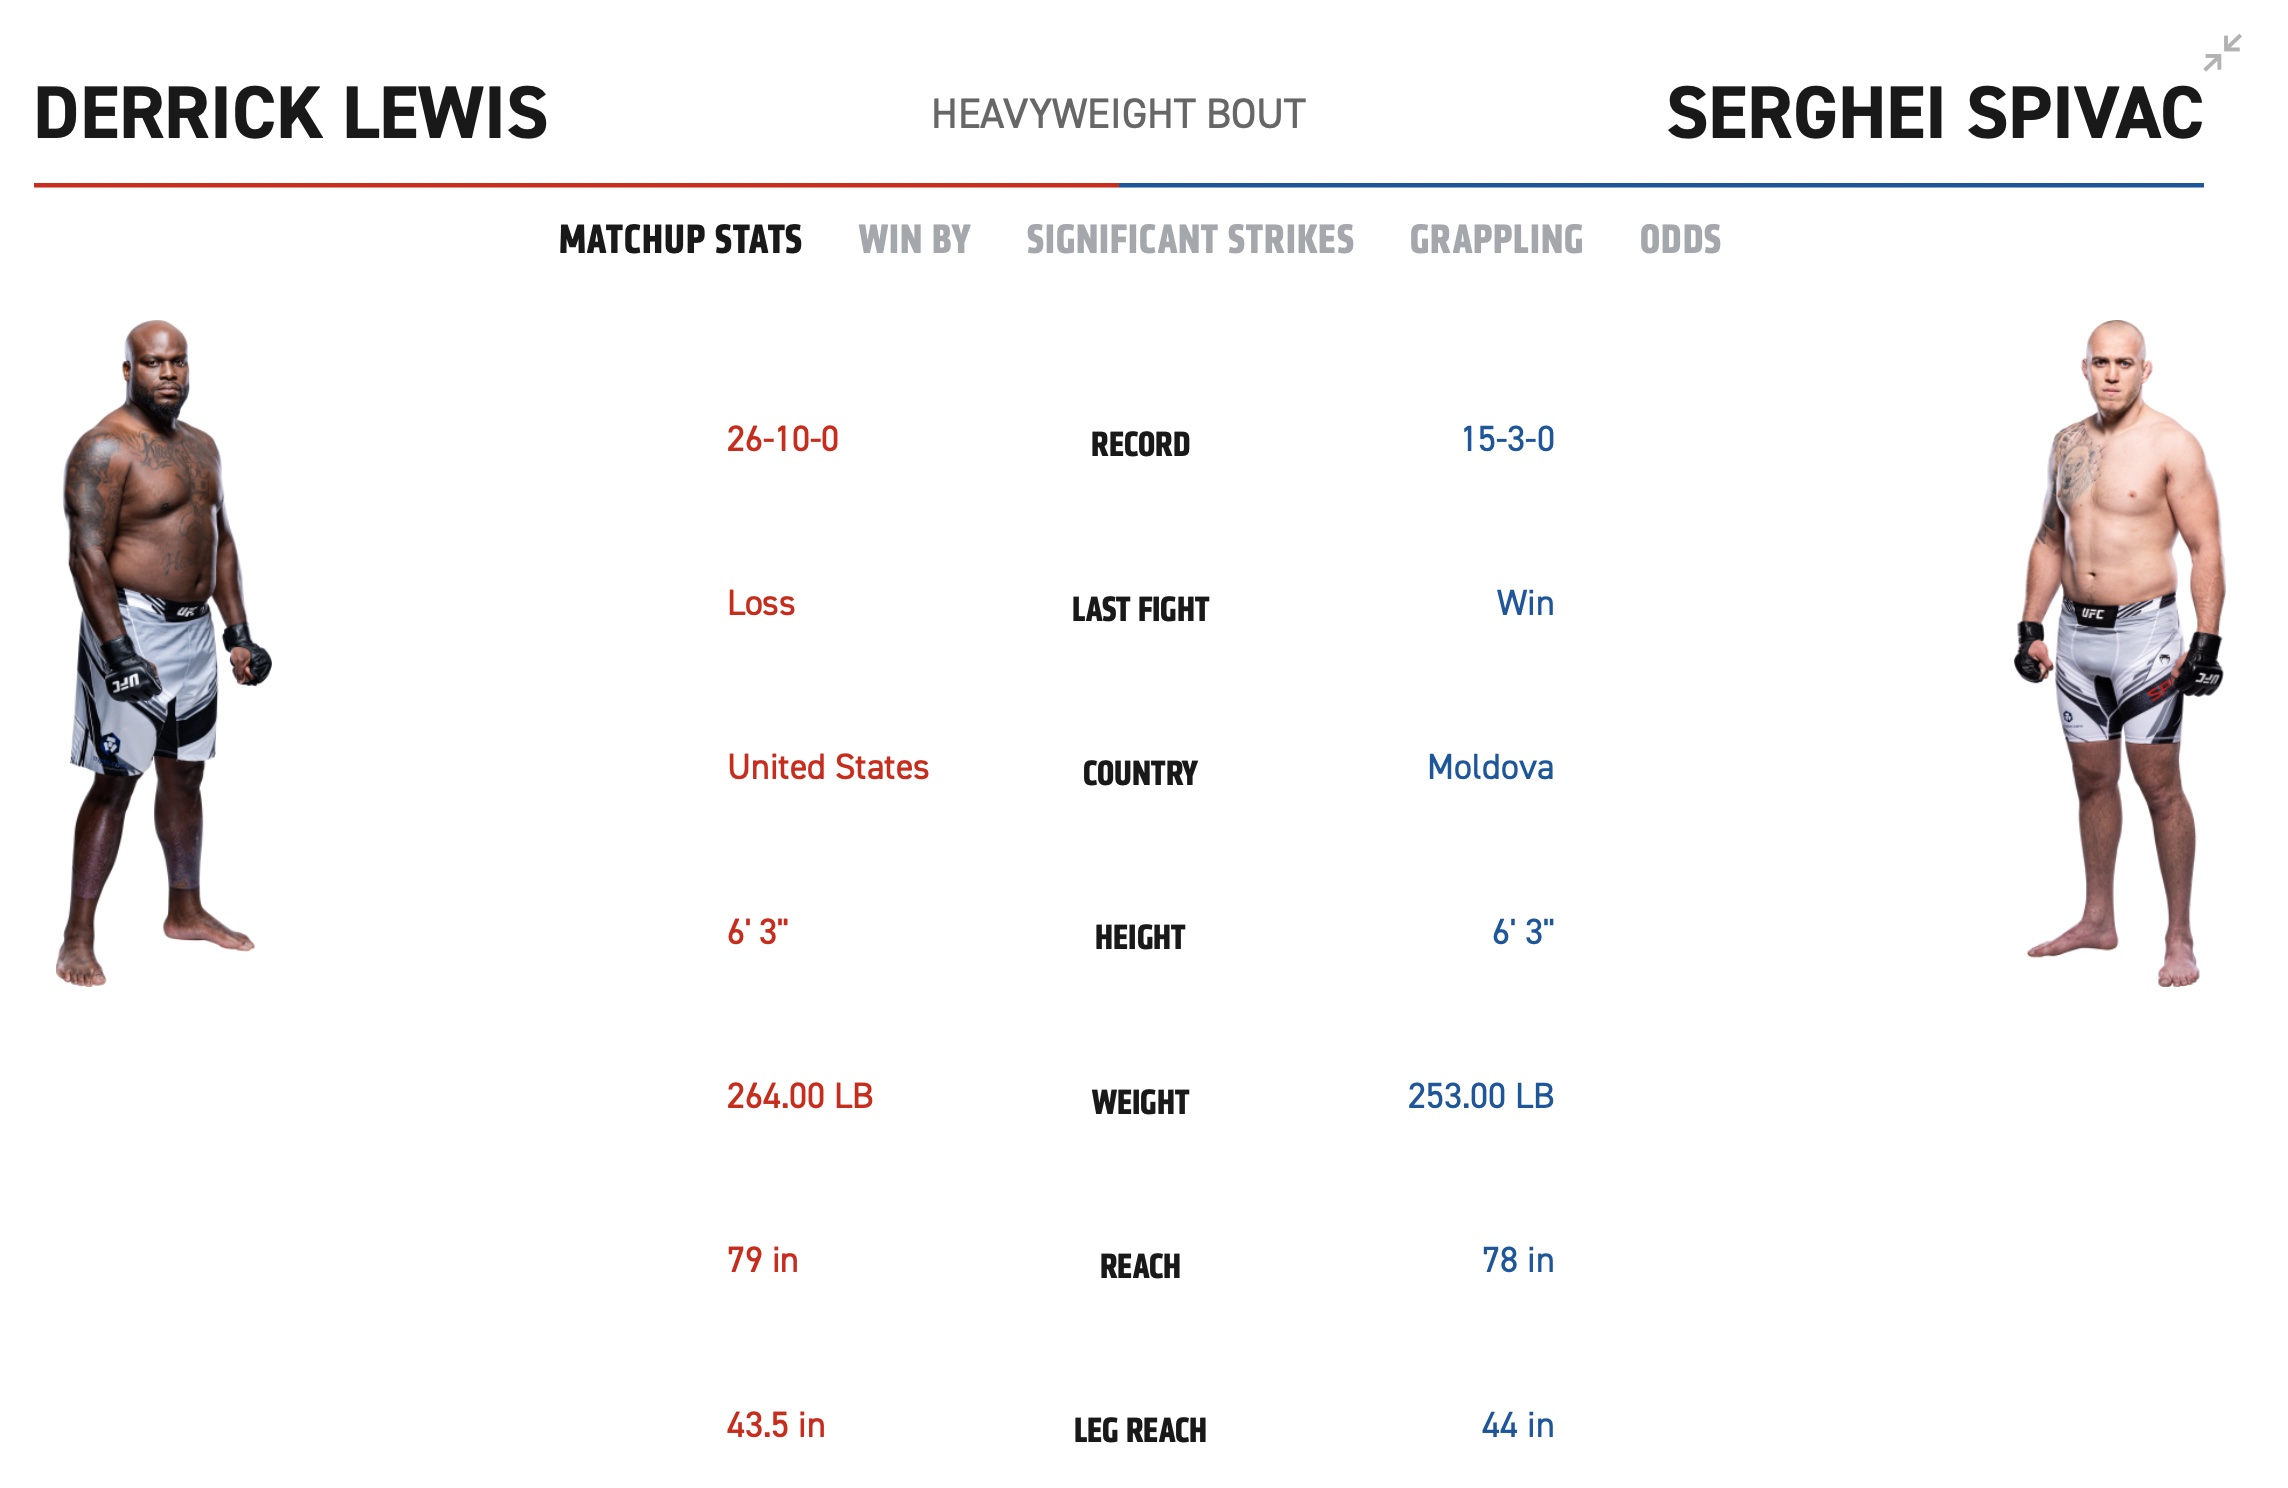 How to watch UFC 281 Lewis vs Spivac 1